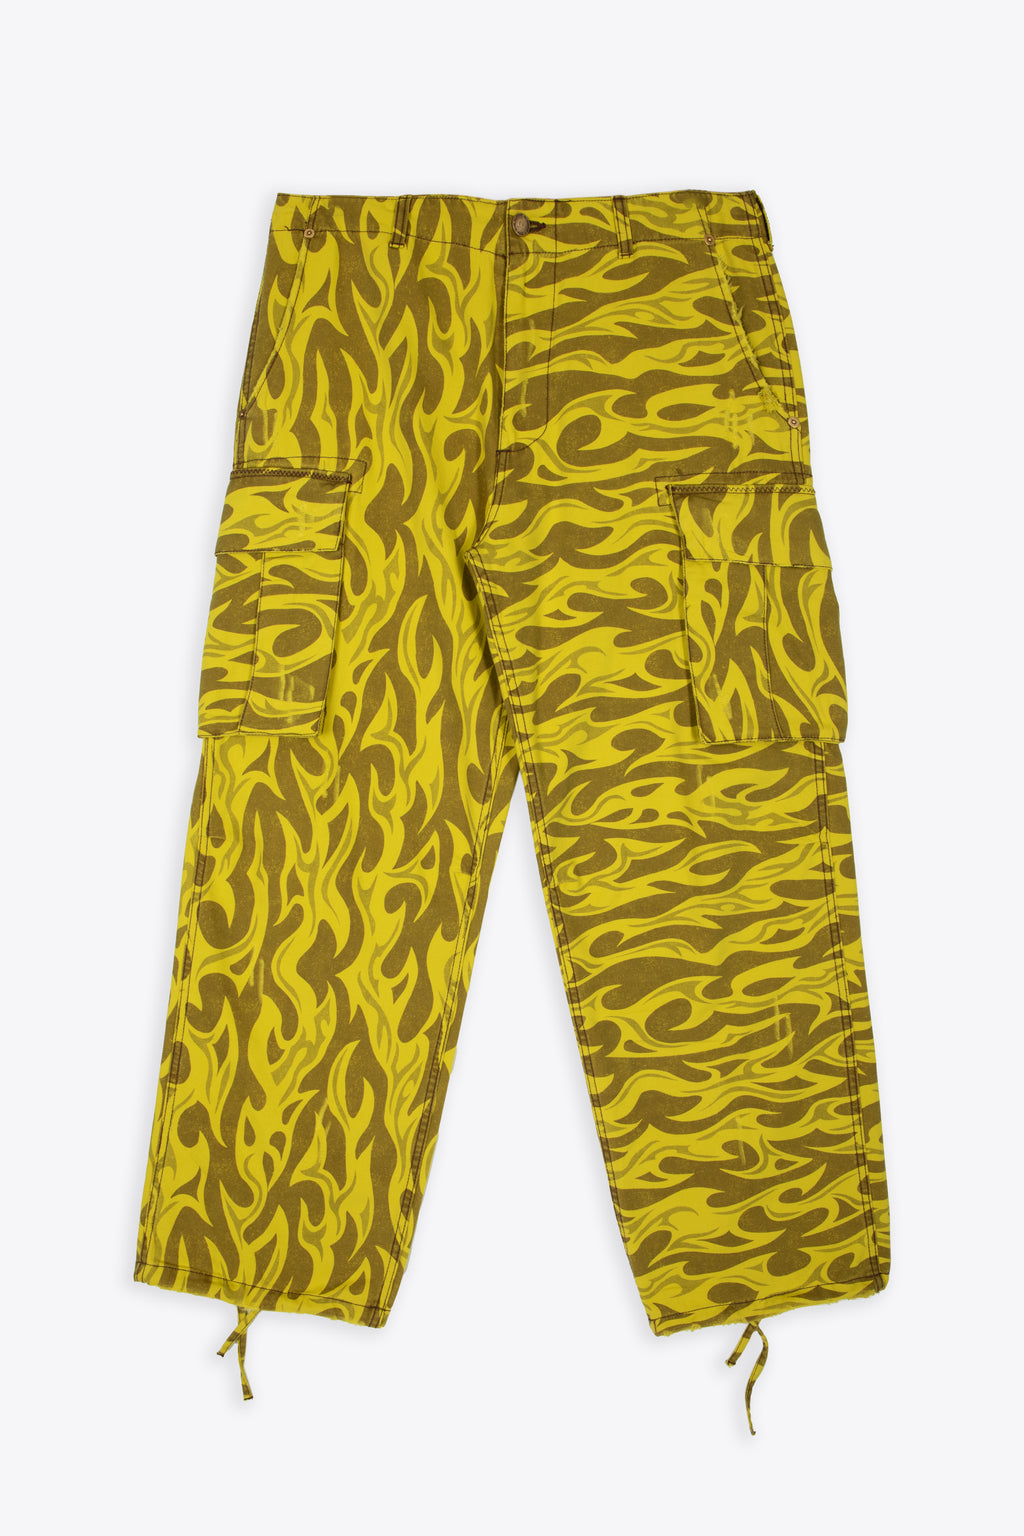 alt-image__Yellow-canvas-printed-cargo-pant---Unisex-Printed-Cargo-Pants-Woven-